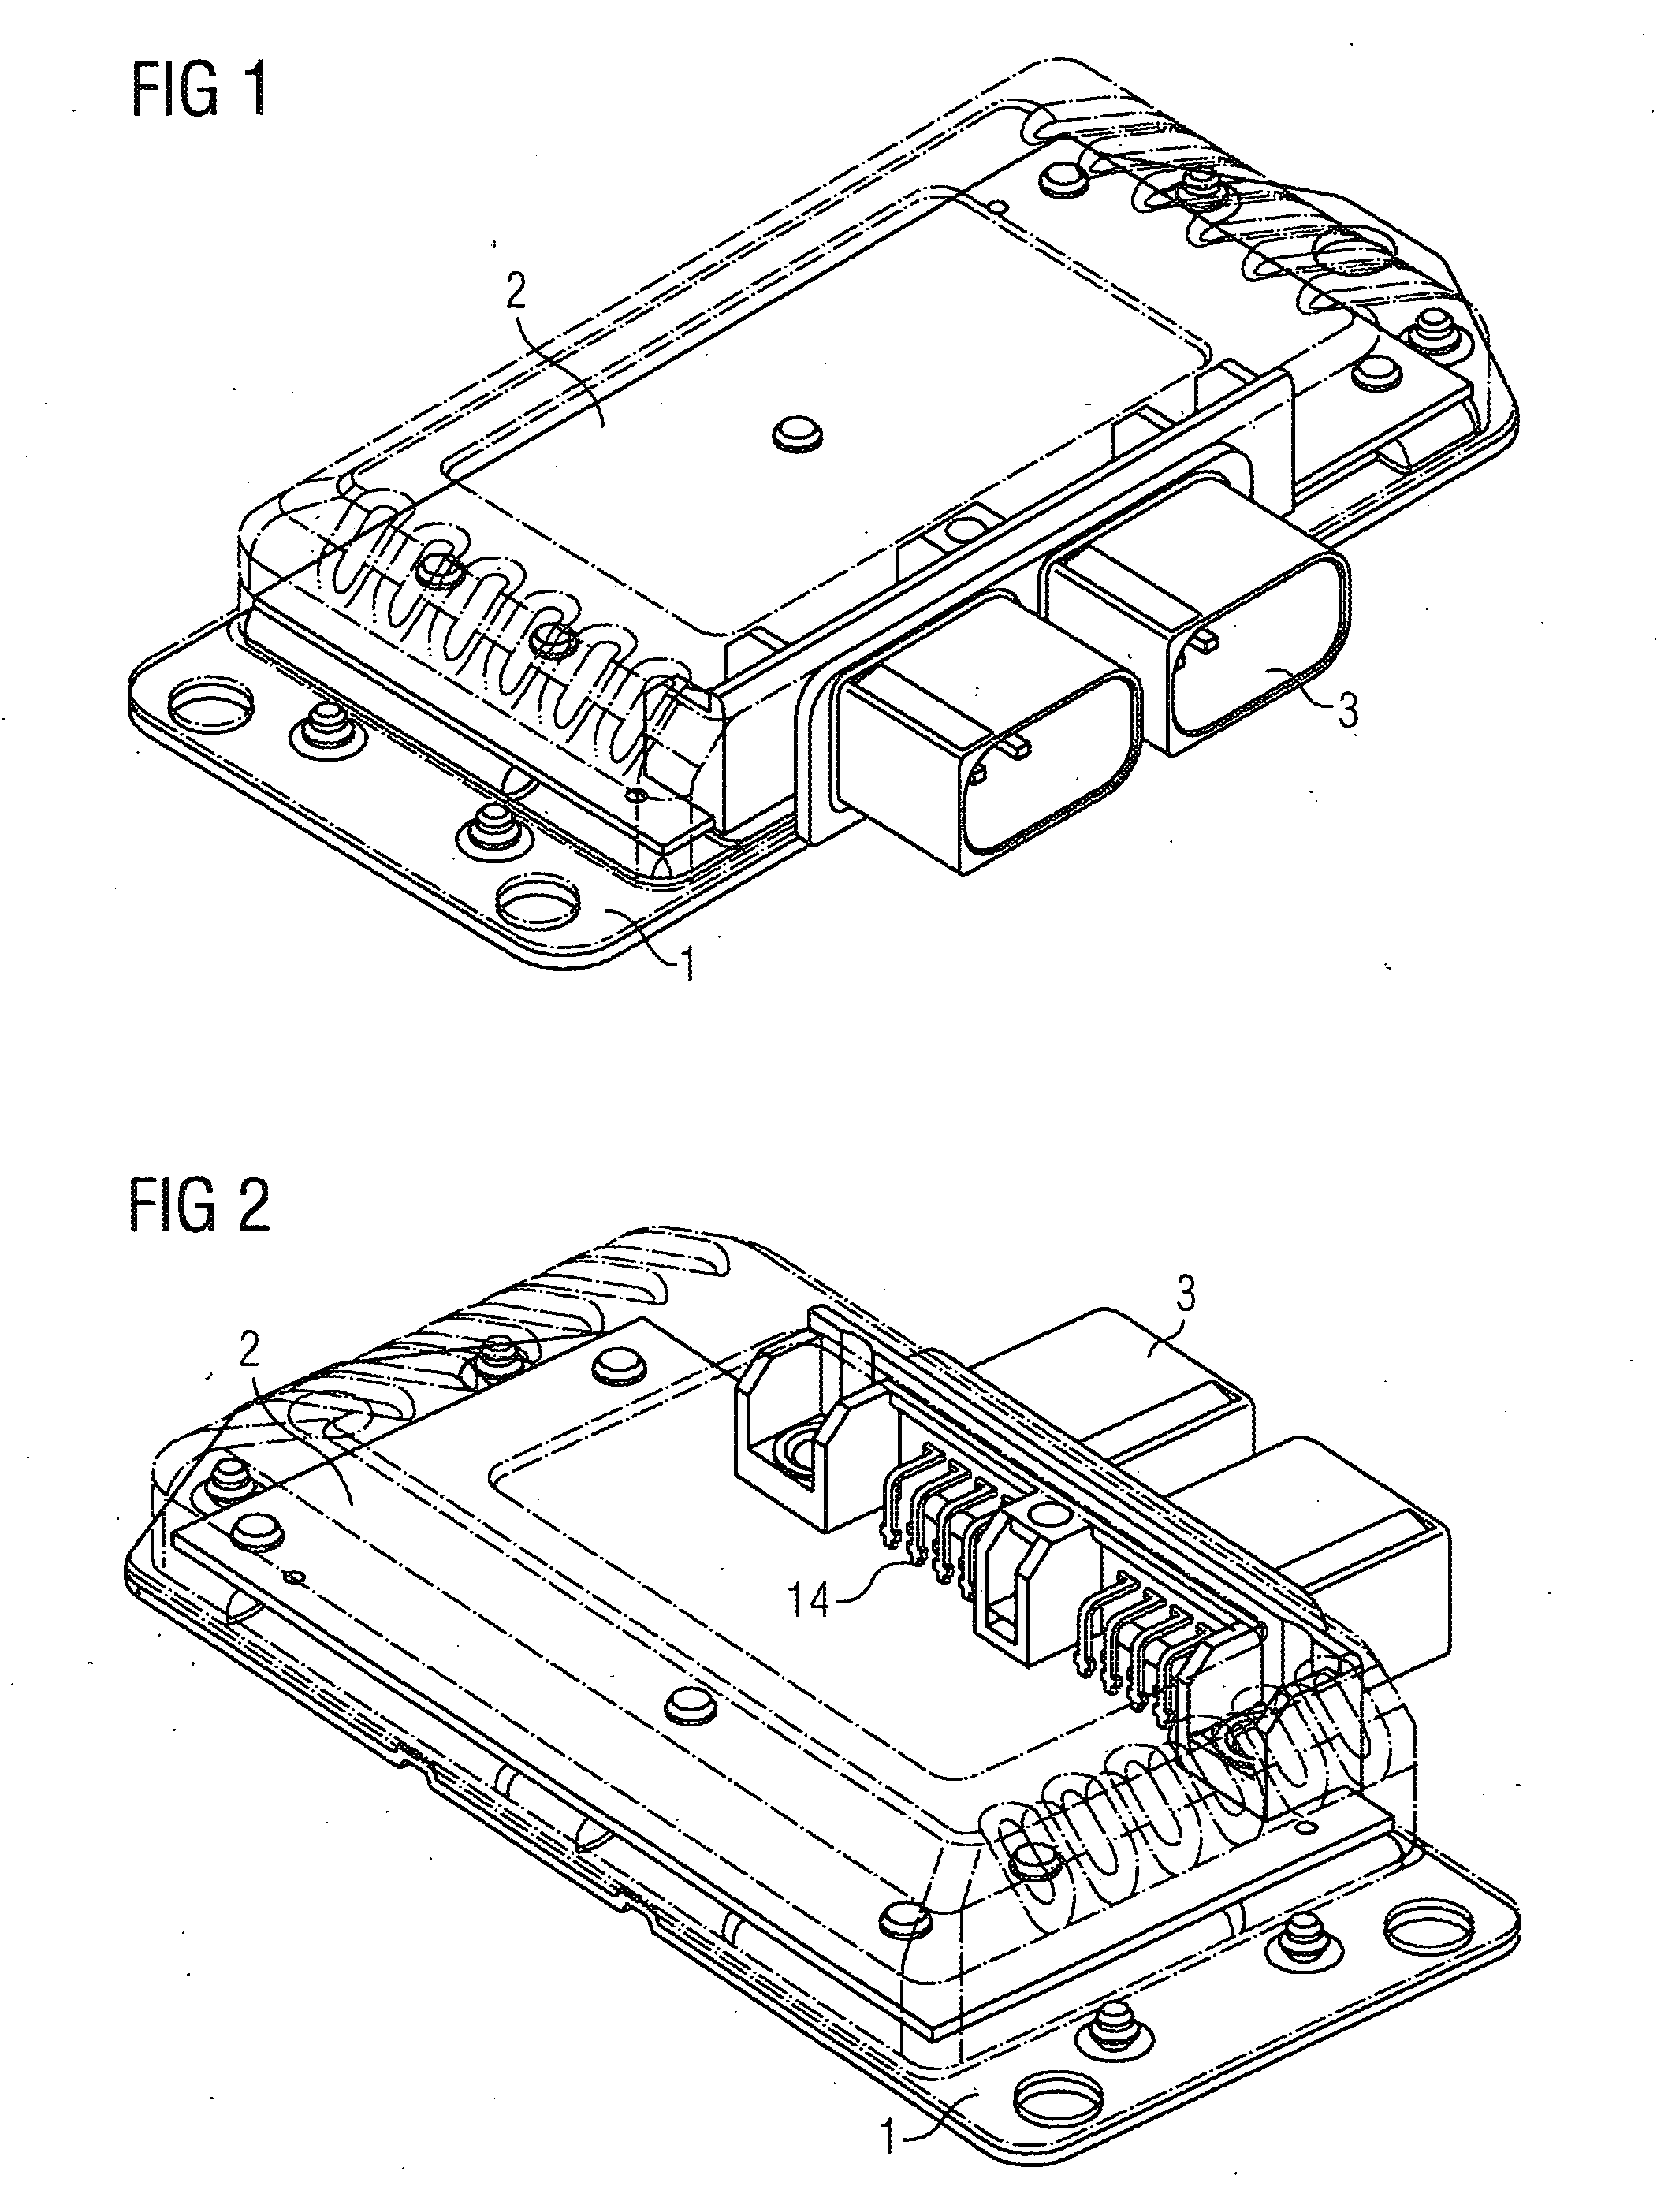 Electric Device Having a Plastic Plug Part Arranged on a Circuit Support